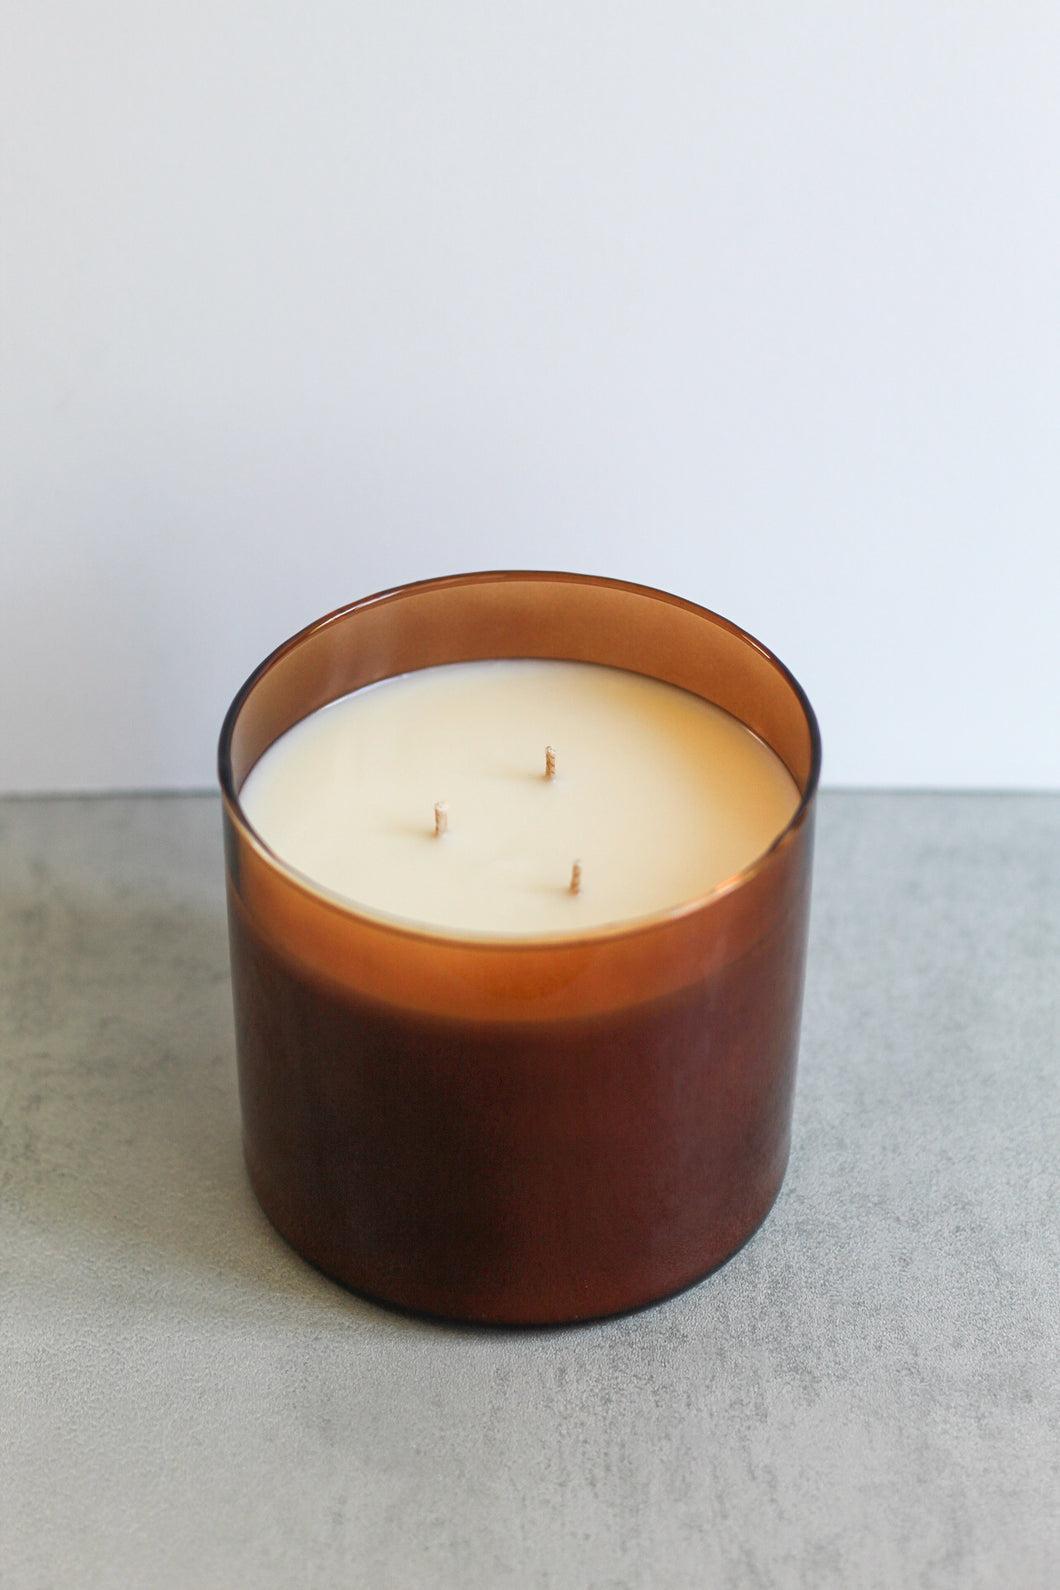 Triple Wick Soy Candle,  Hand Poured, Natural, Eco Friendly, Earthy Scent, 16 oz Amber Jar